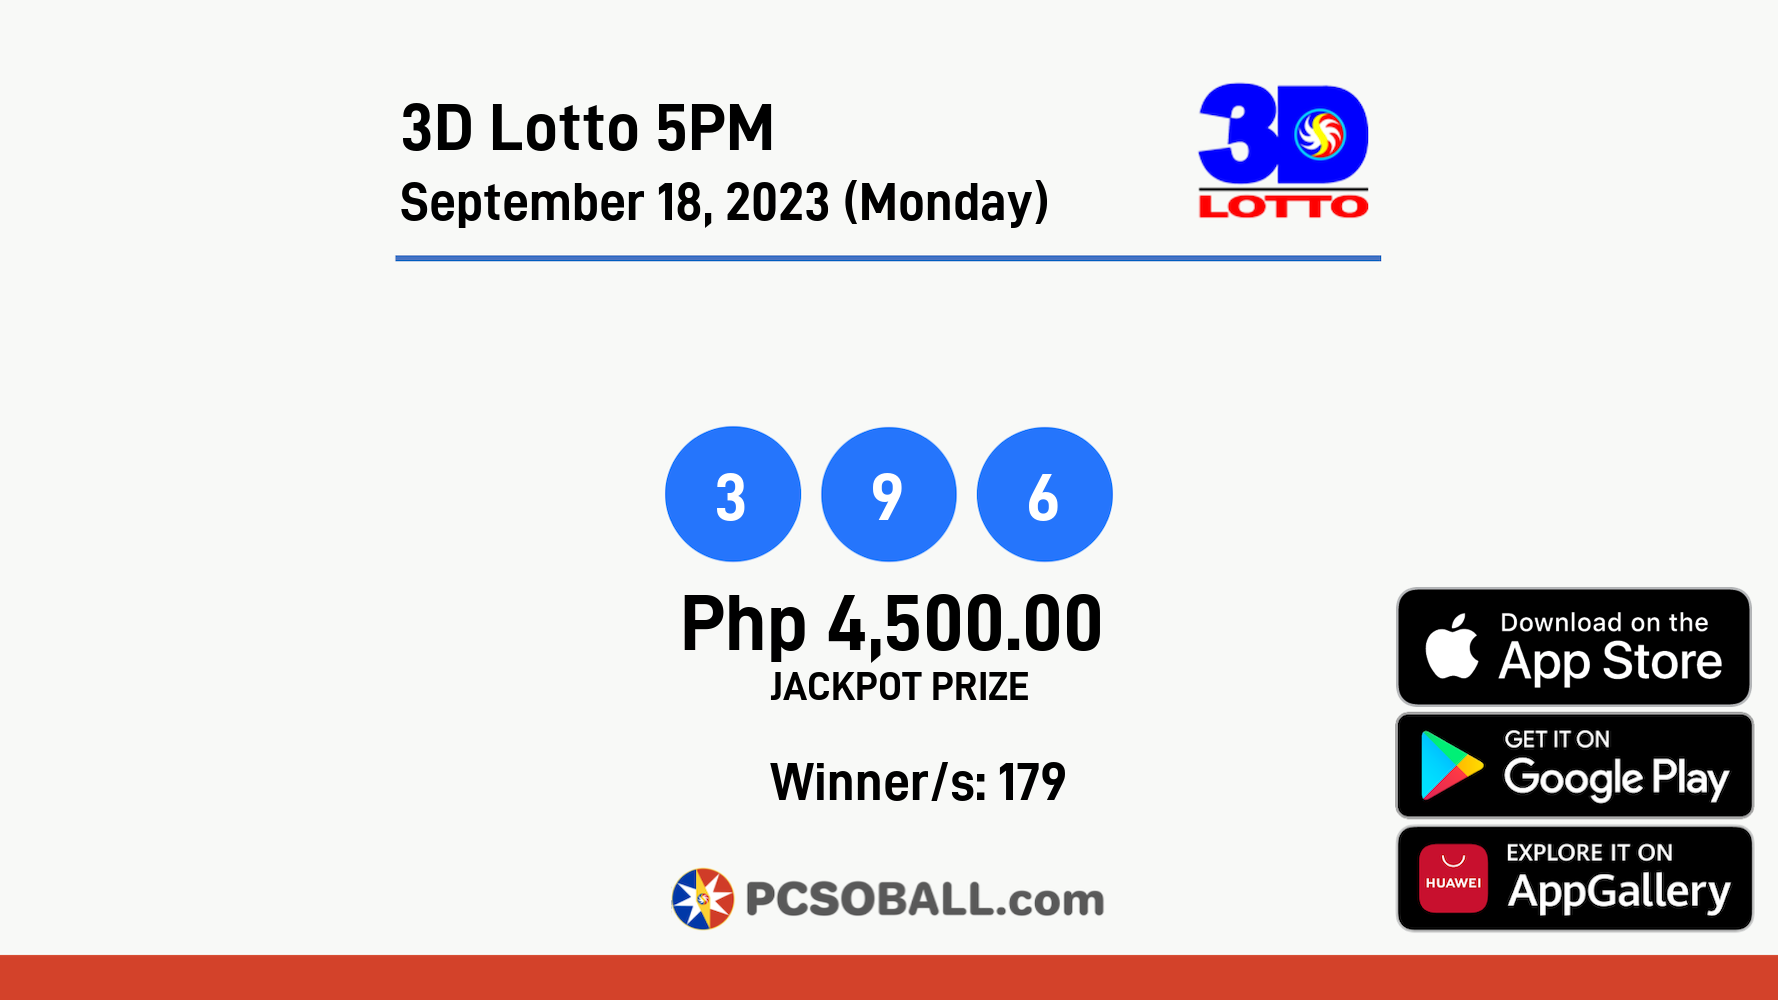 3D Lotto 5PM September 18, 2023 (Monday) Result